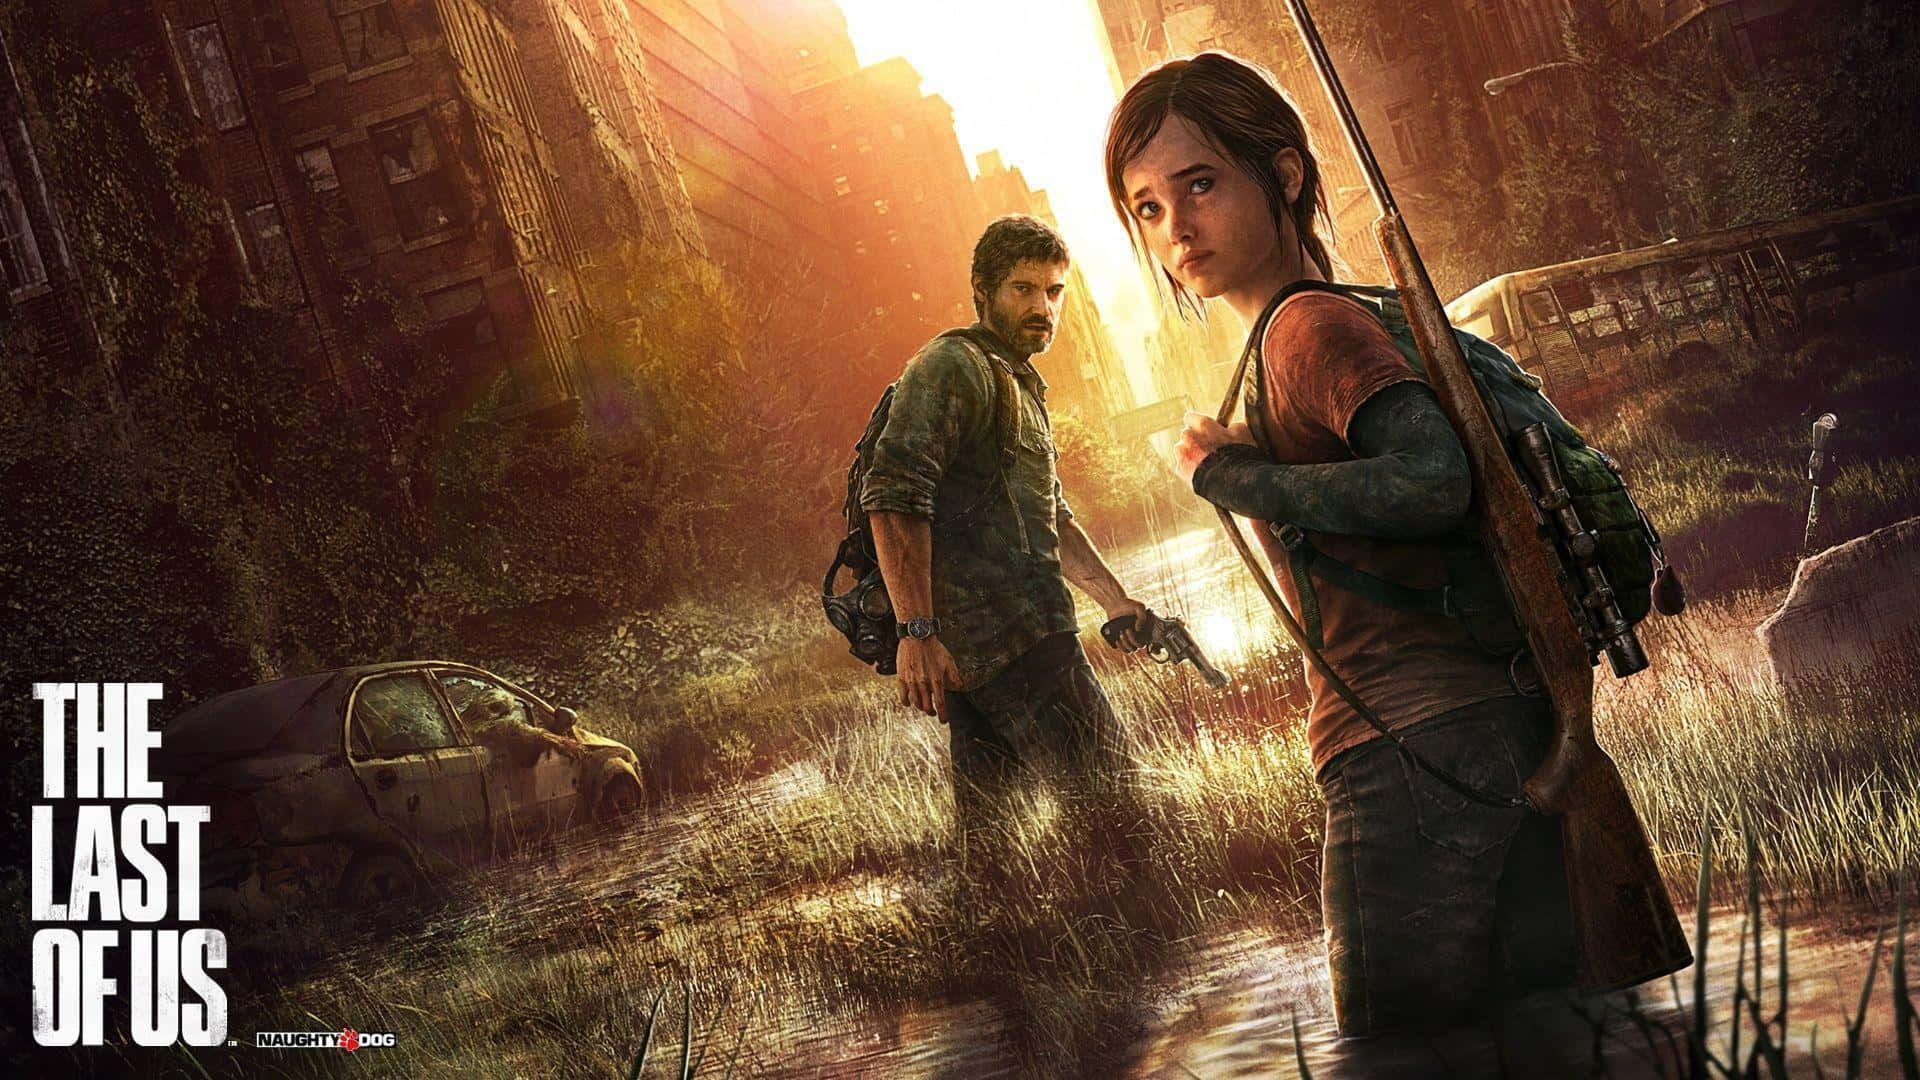 Ellie and Joel exploring an abandoned building in The Last of Us